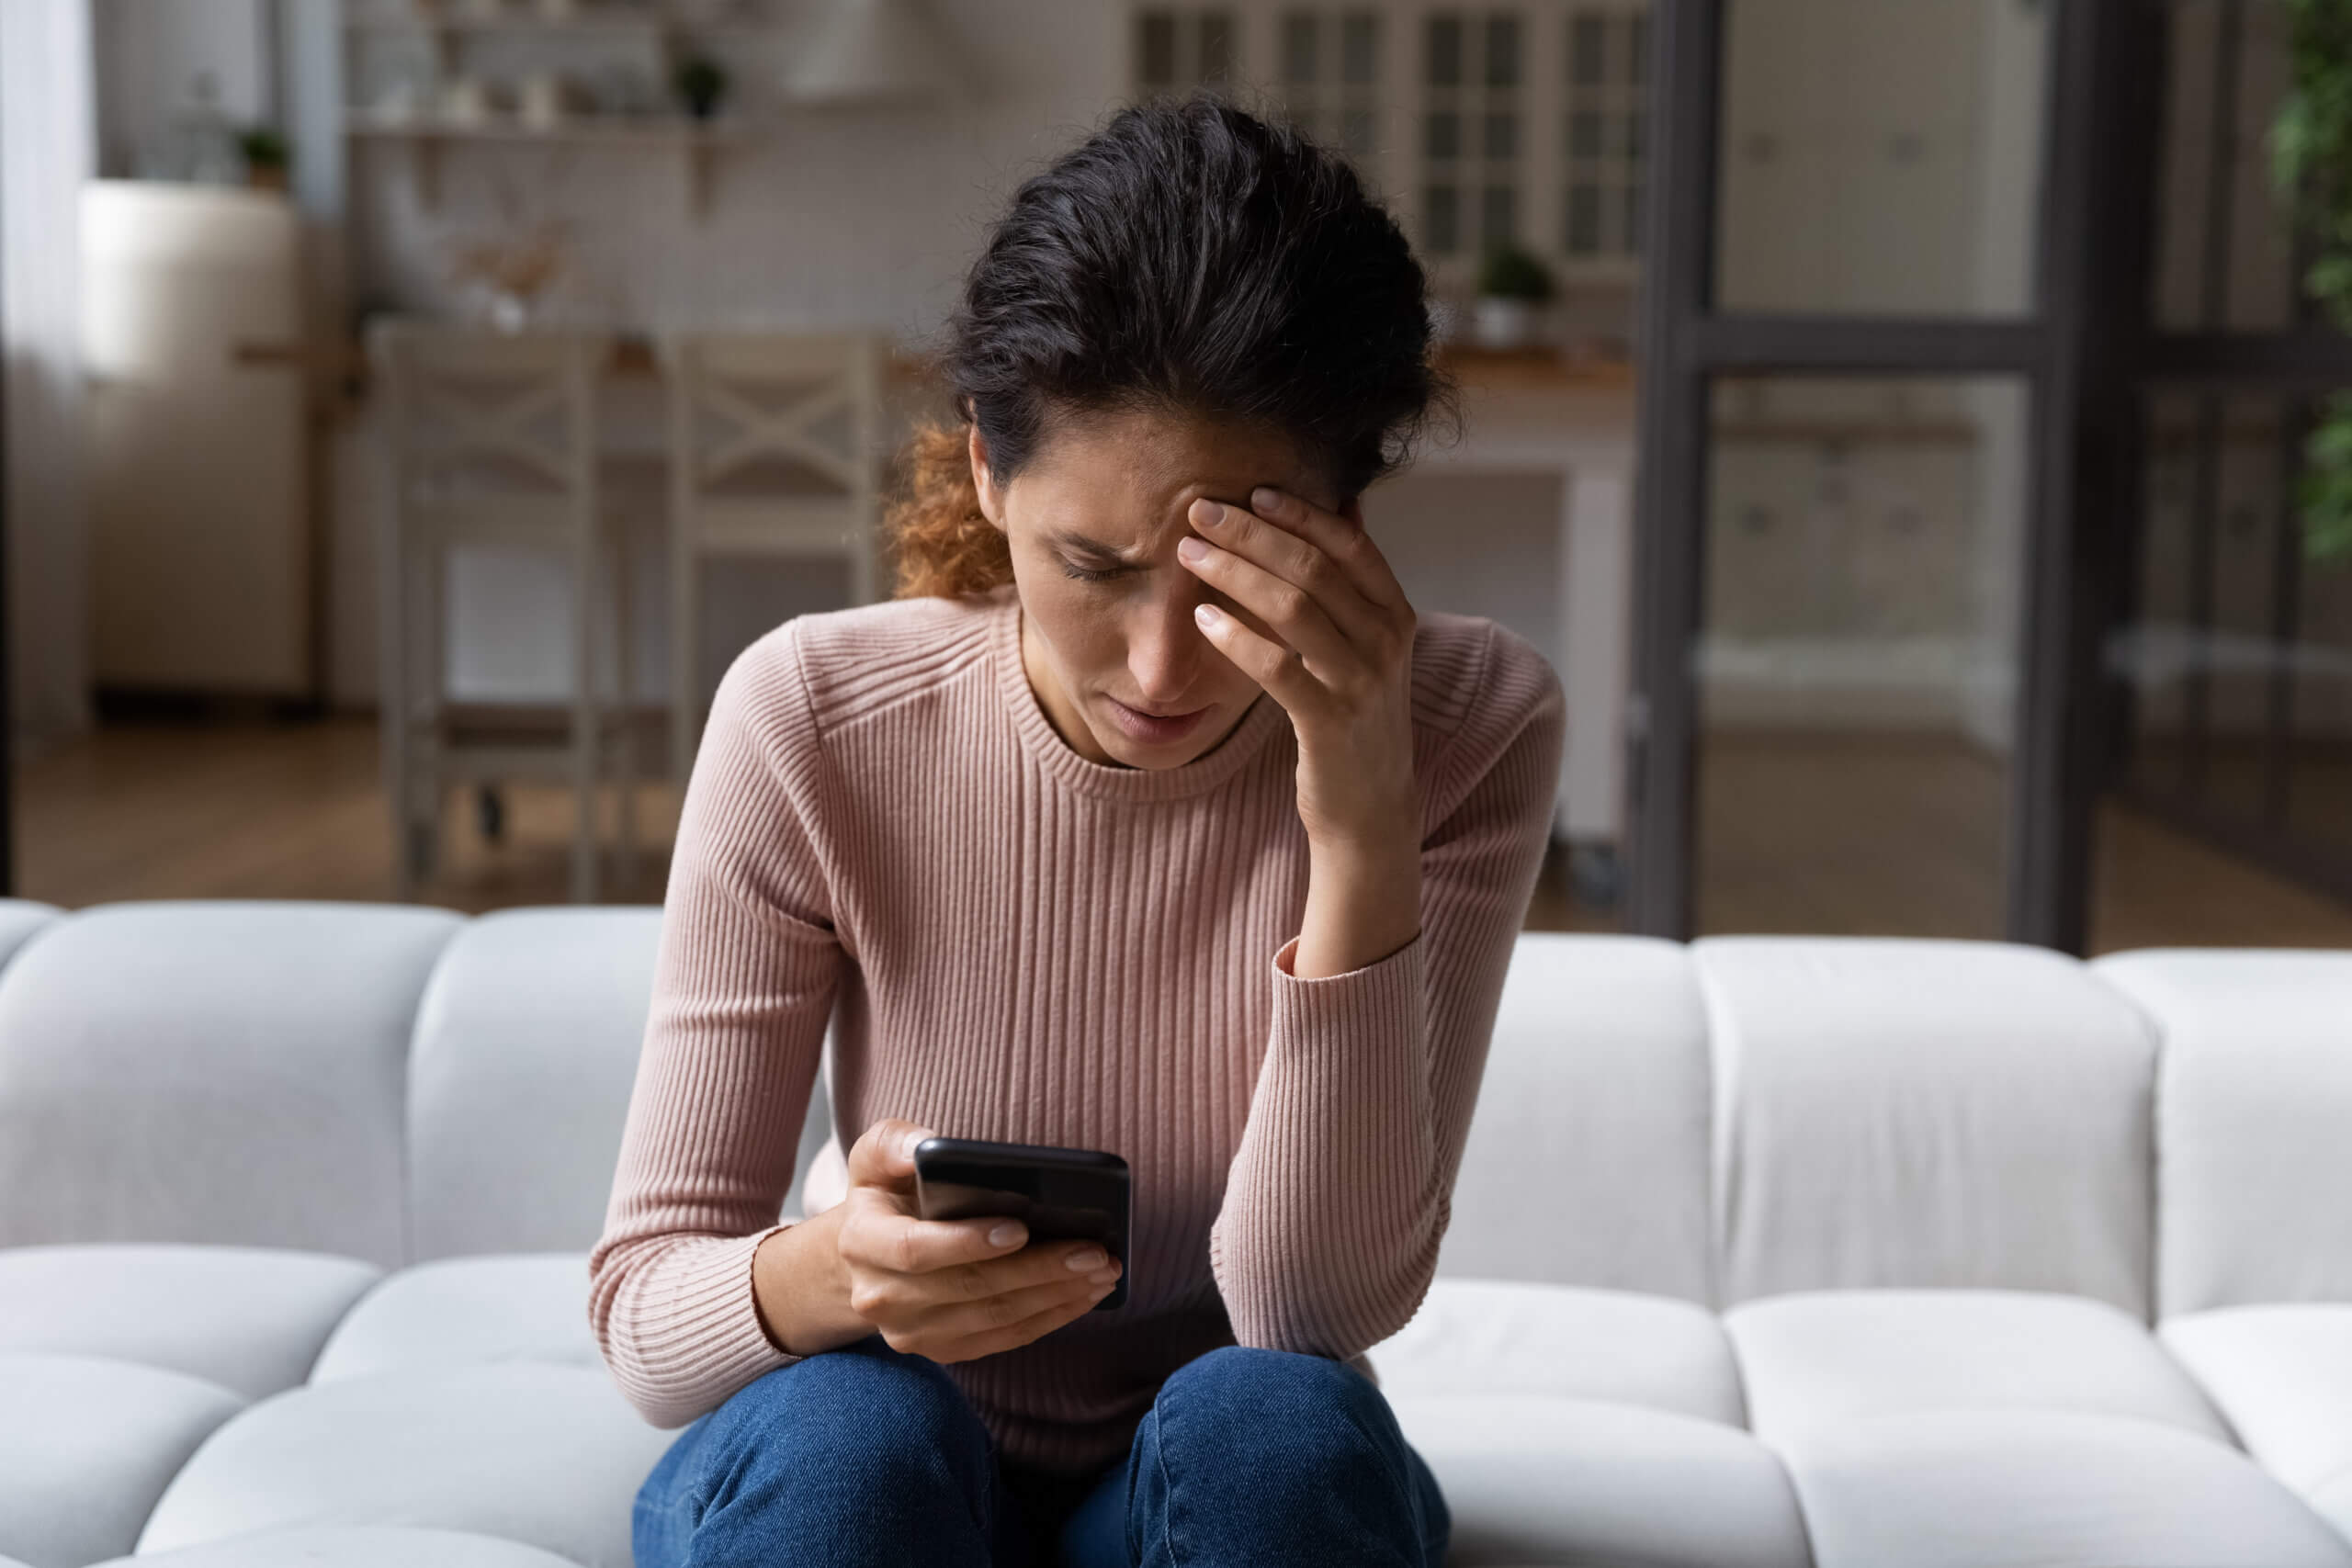 Unhappy woman use smartphone distressed with bad news